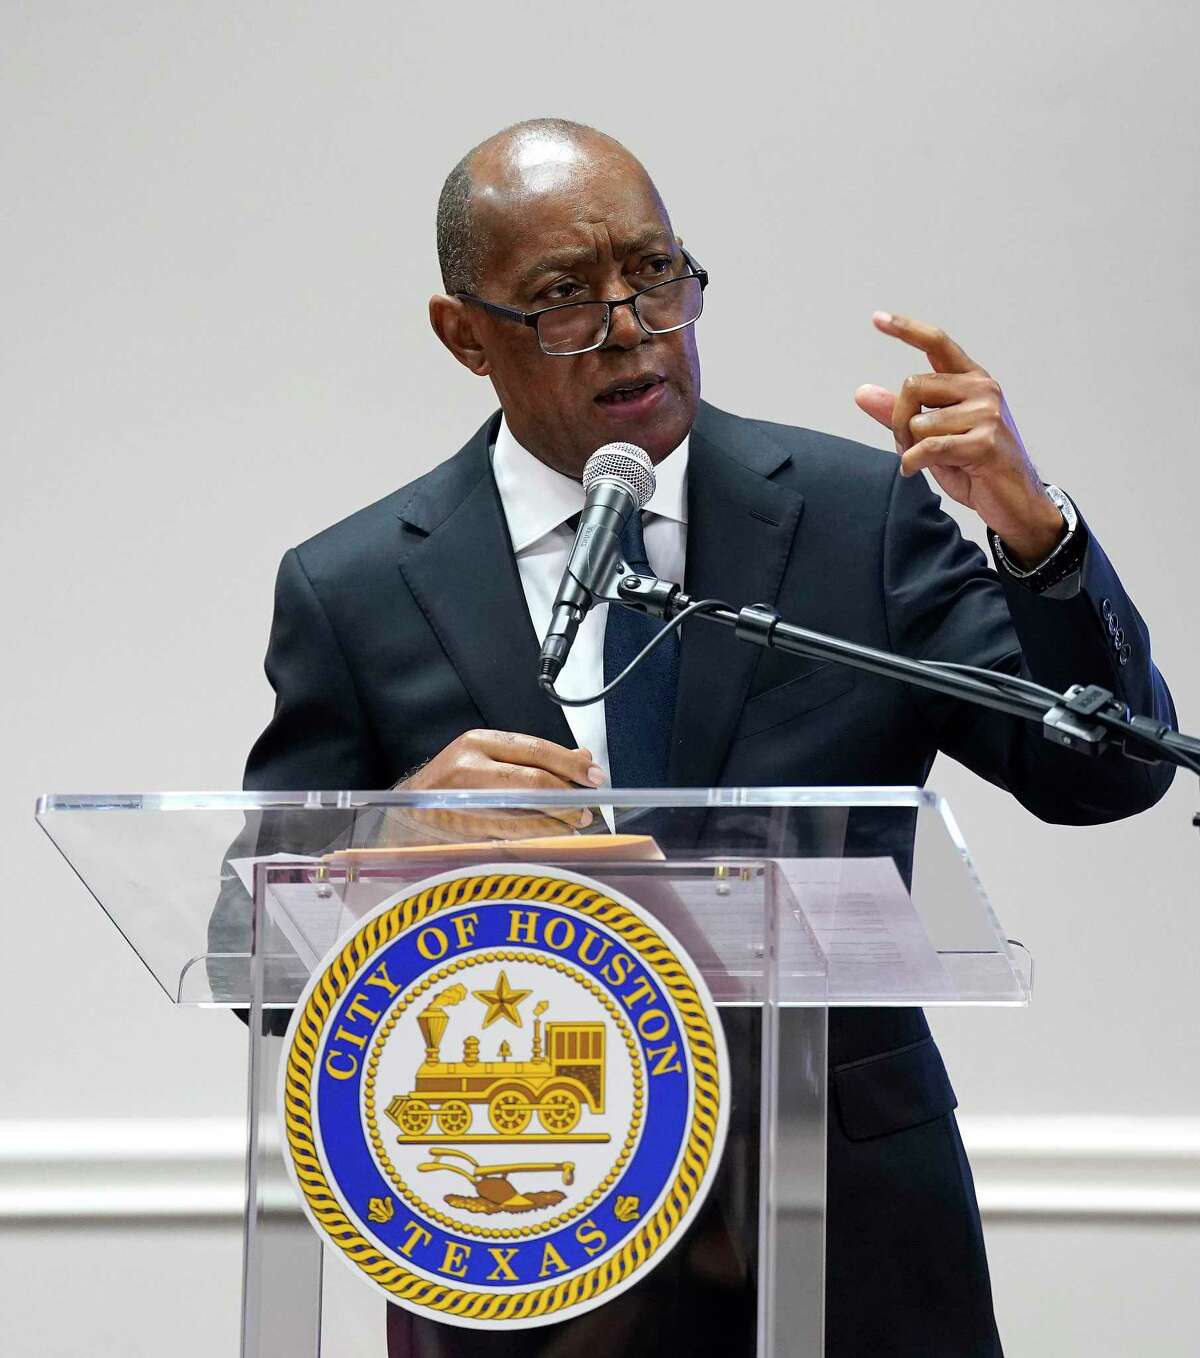 Mayor Sylvester Turner speaks during "Friends in Solidarity for Gun Violence Reduction" news conference at Lilly Grove Missionary Baptist Church on Wednesday, Sept. 7, 2022 in Houston.